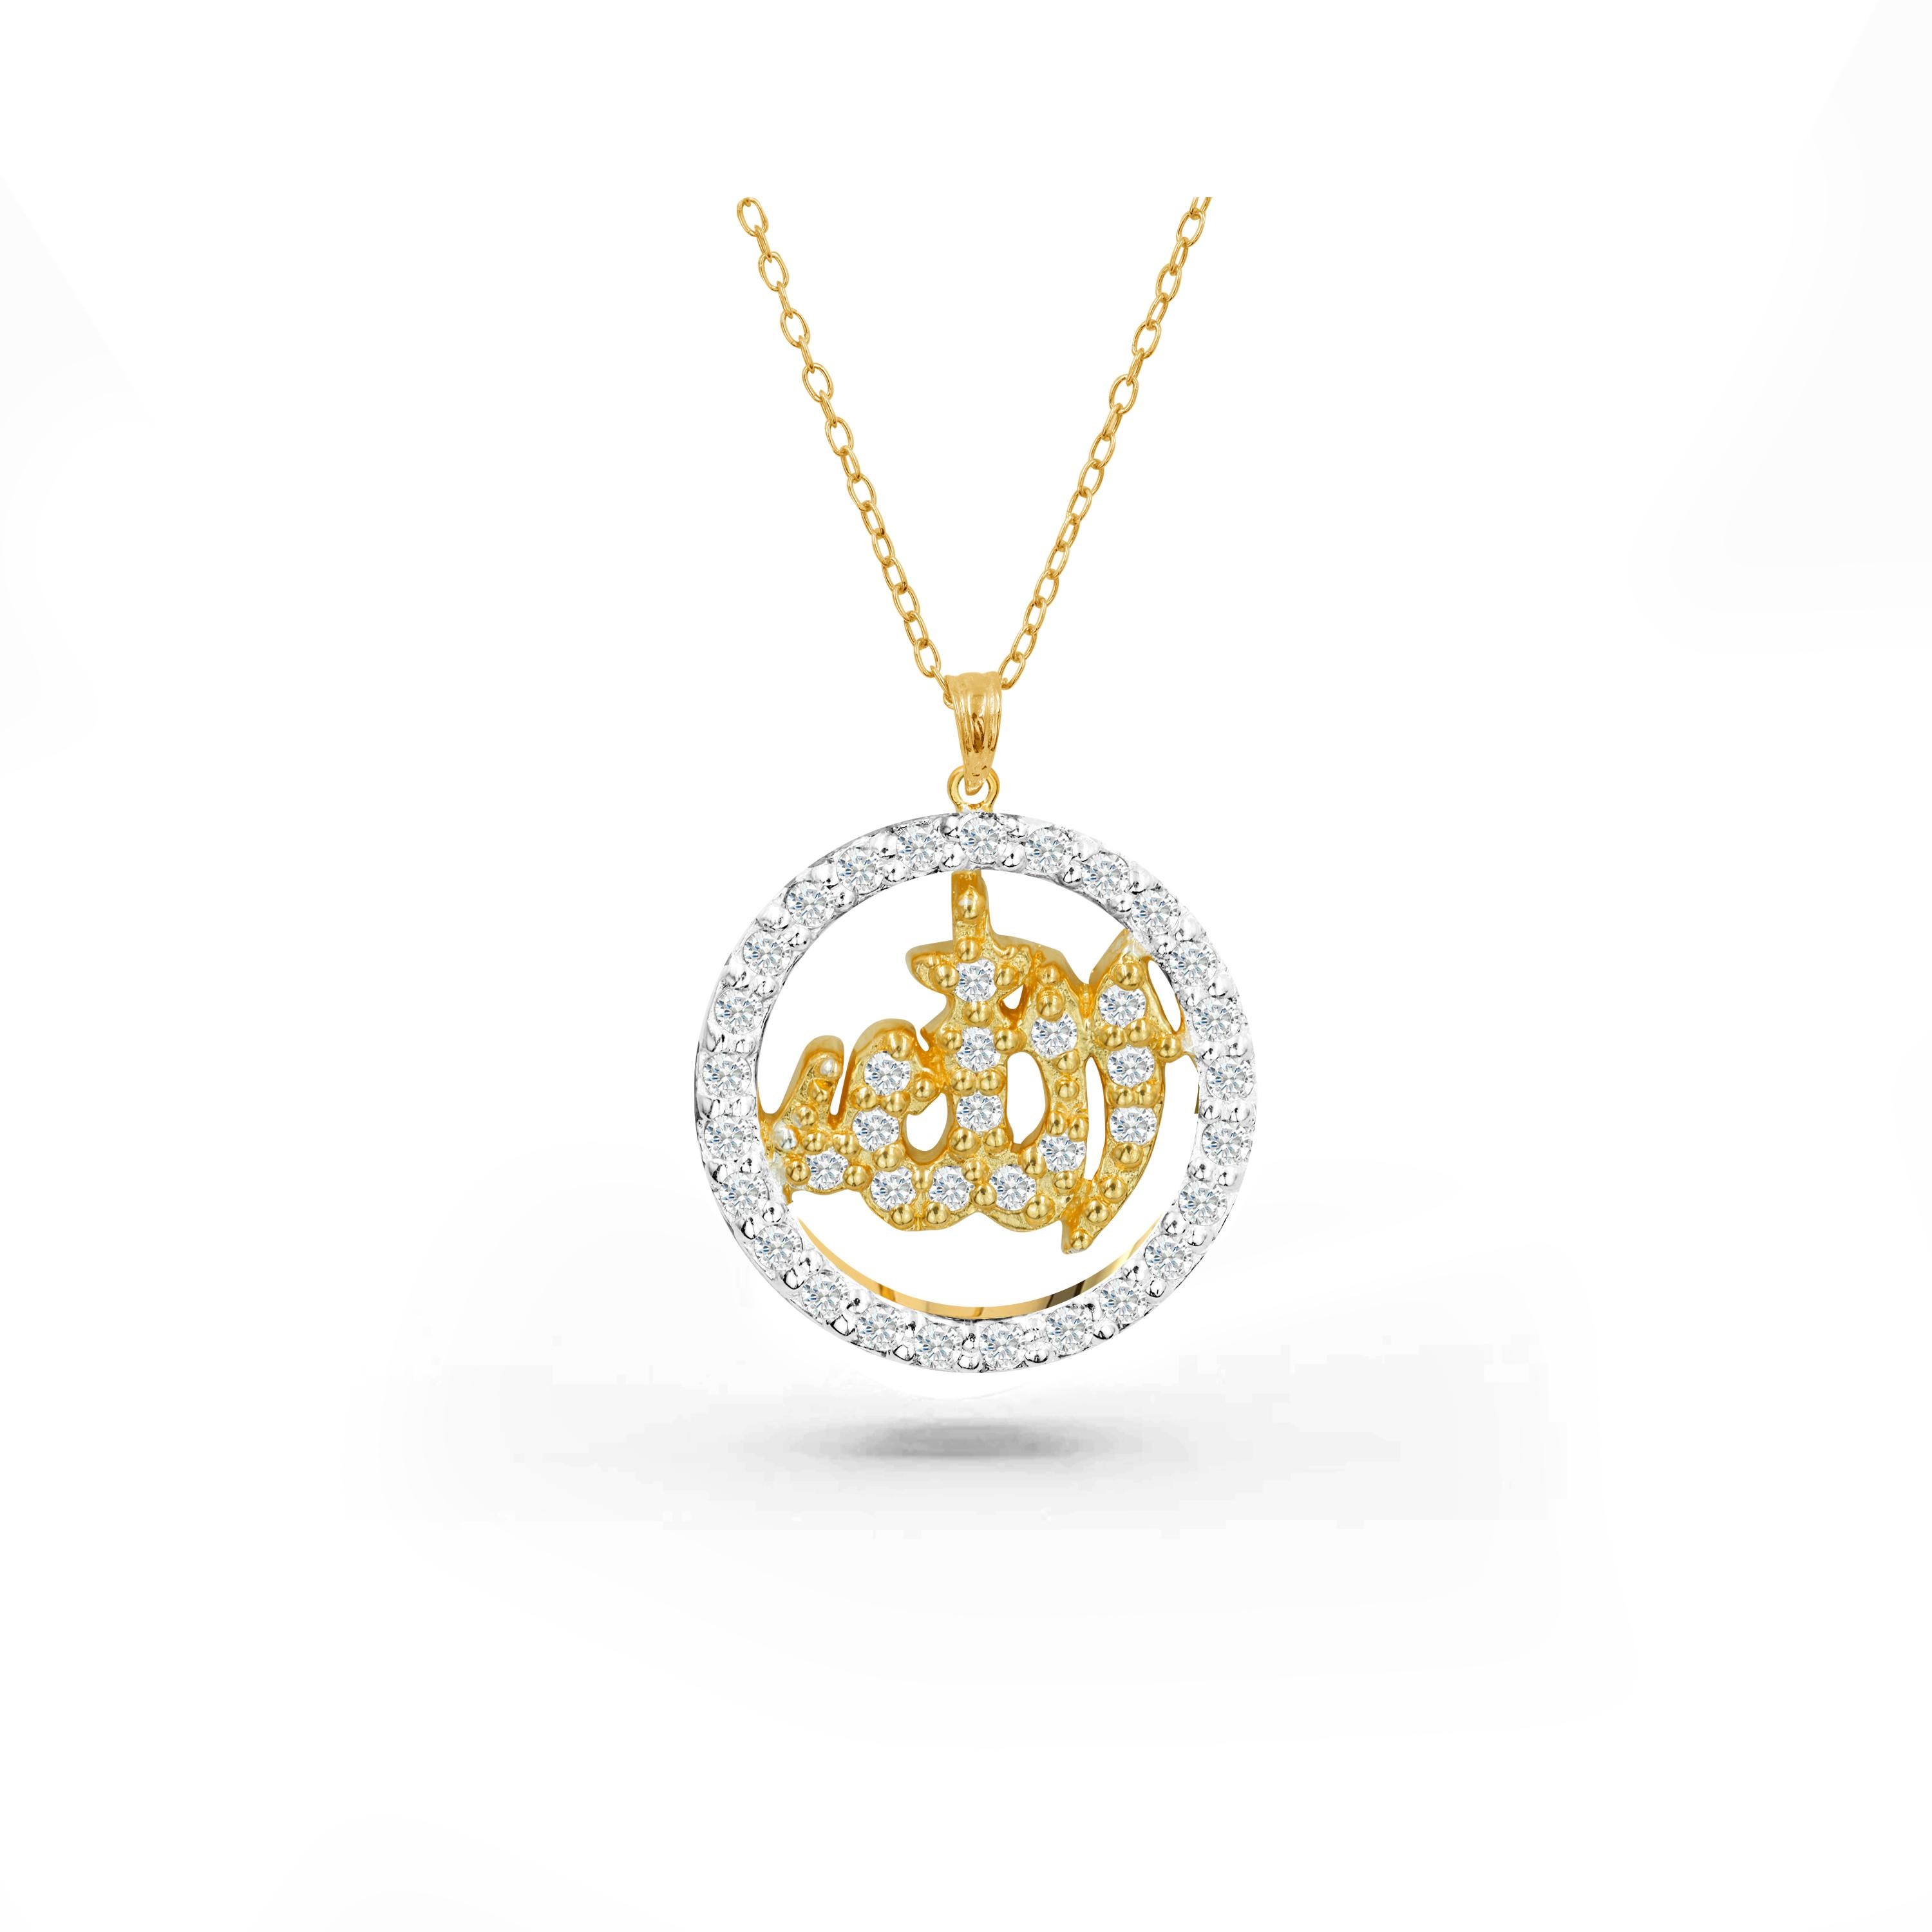 The Handcrafted Allah diamond necklace is perfect everyday wear to bring inner peace and spirituality. This beautiful Allah religious necklace is a statement piece. This Islam necklace can be customized to your choice of gold color and karat. 